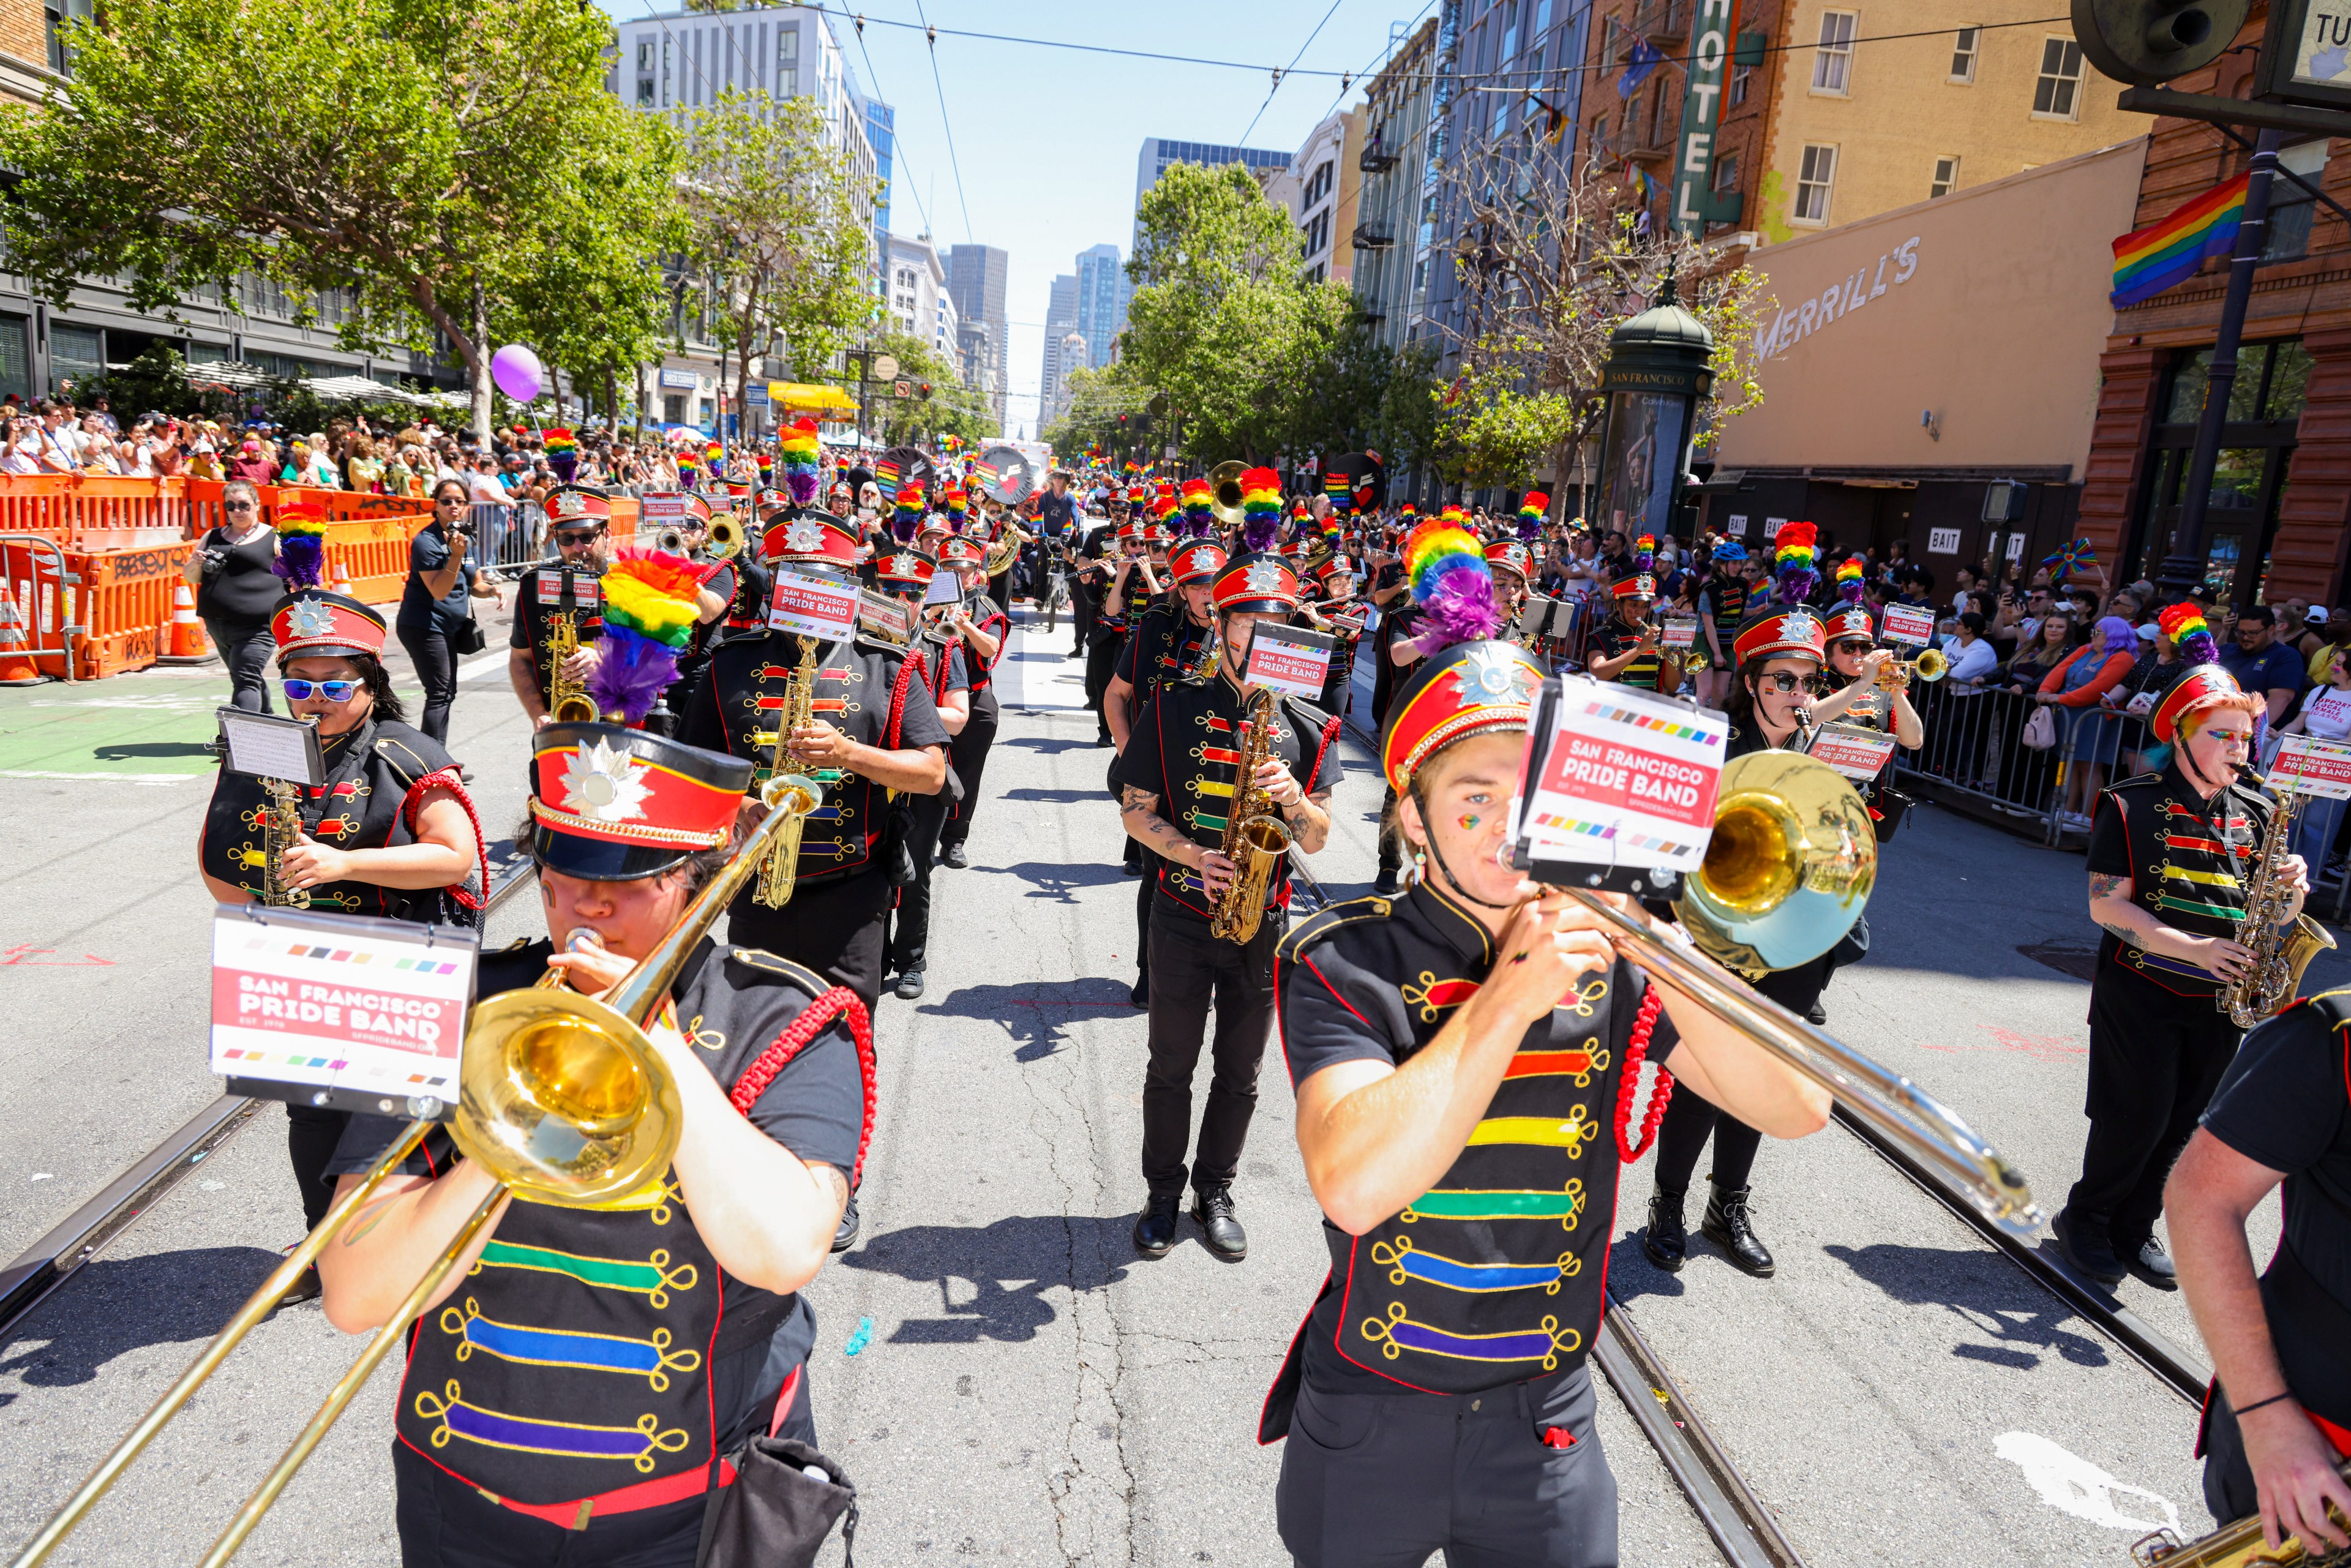 A brass band dressed in black and red uniforms with rainbow accents marches down a city street adorned with Pride flags, while crowds cheer from behind barricades on a sunny day.